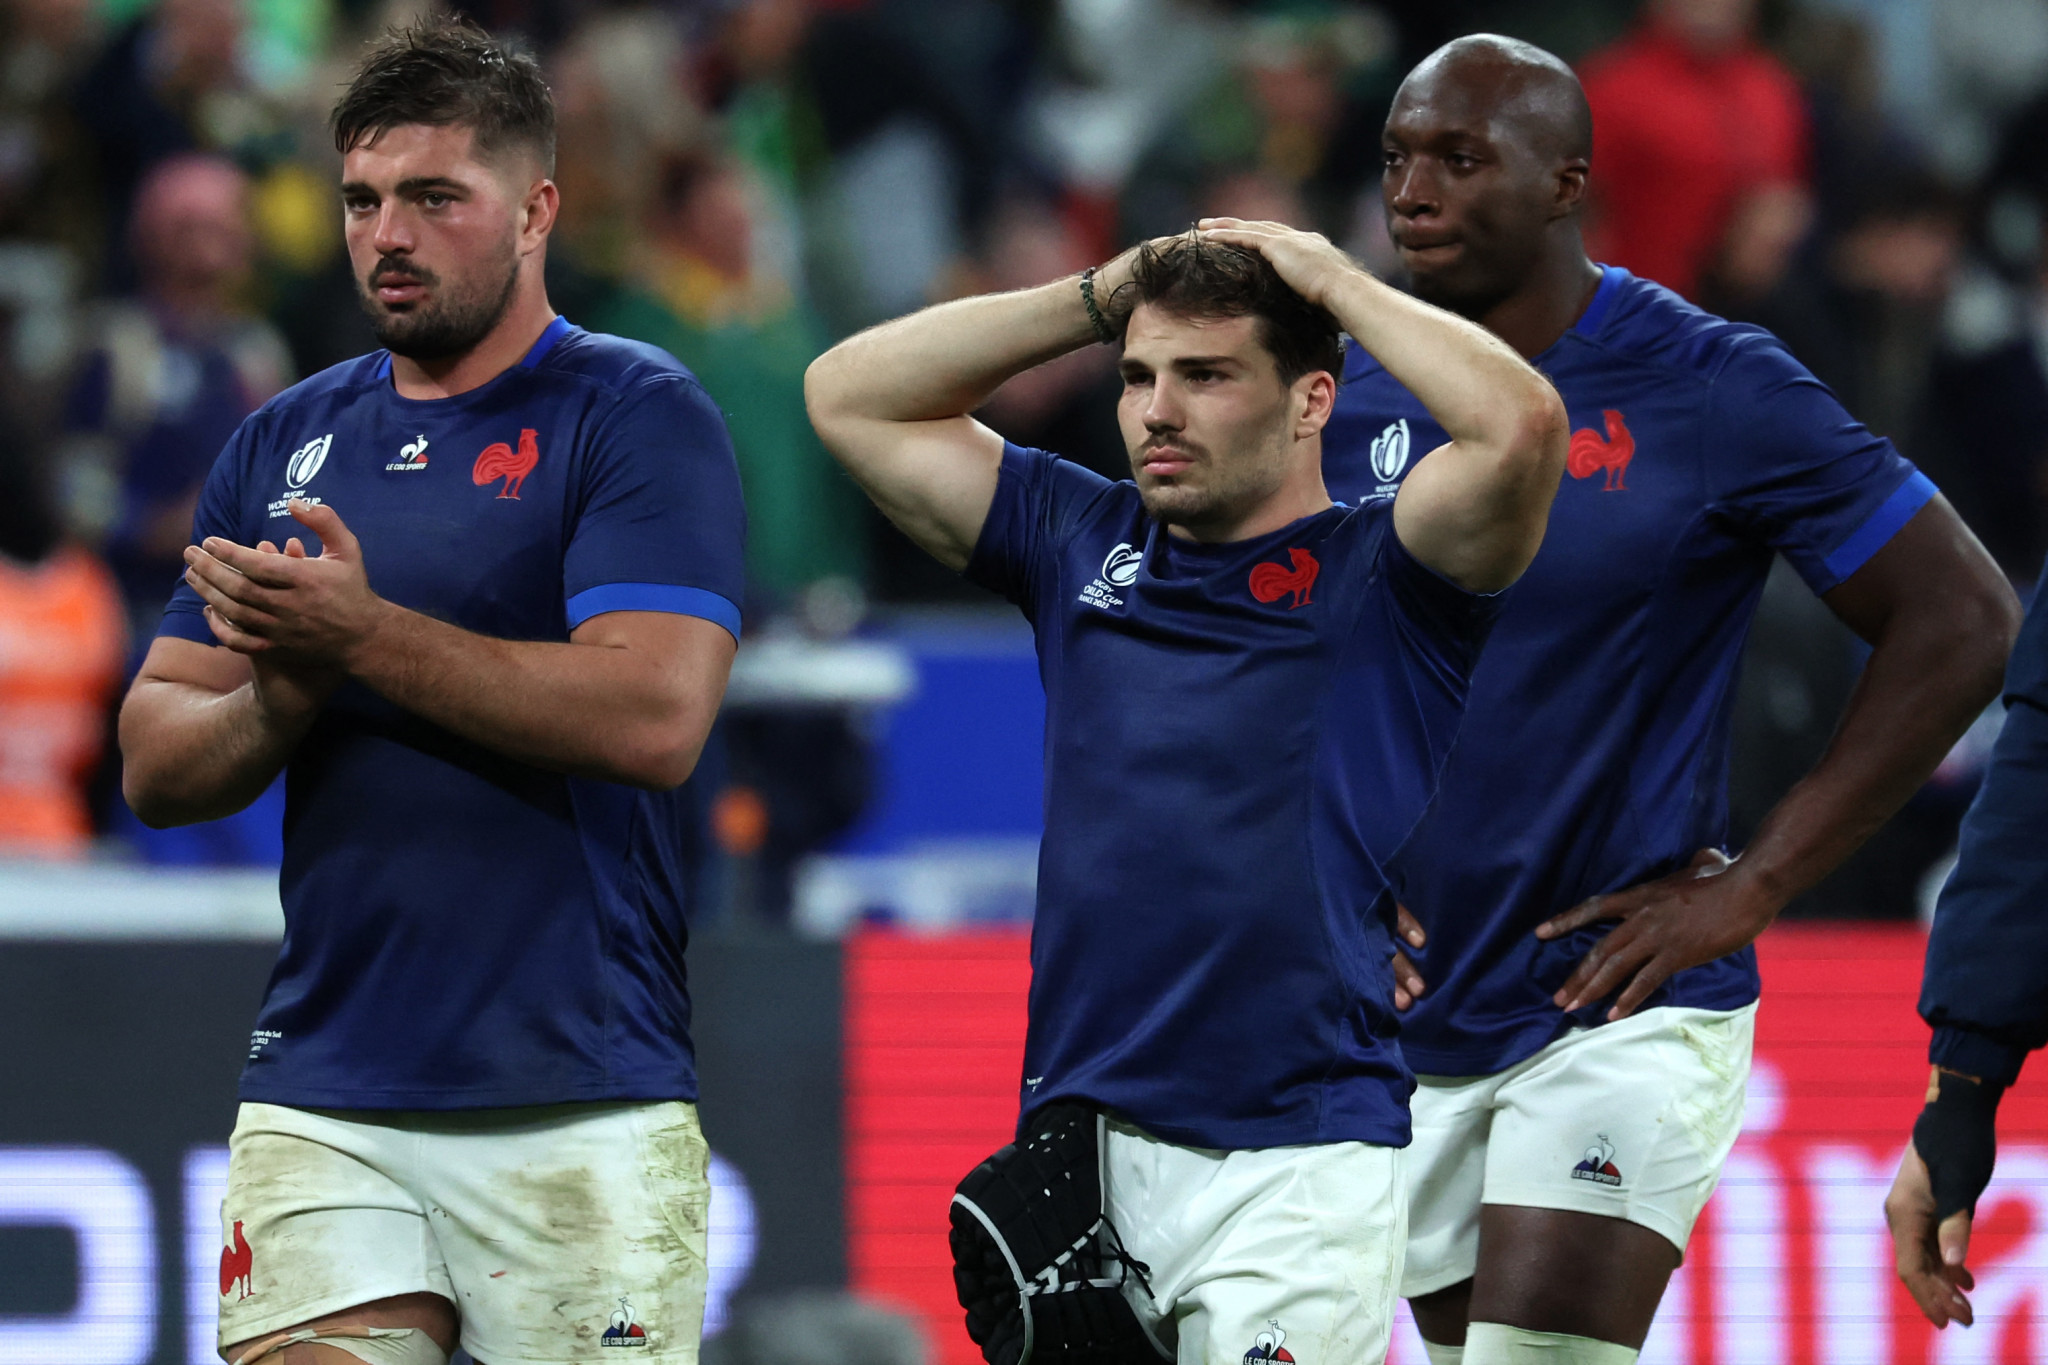 France were eliminated from their home Rugby World Cup by defending champions South Africa ©Getty Images